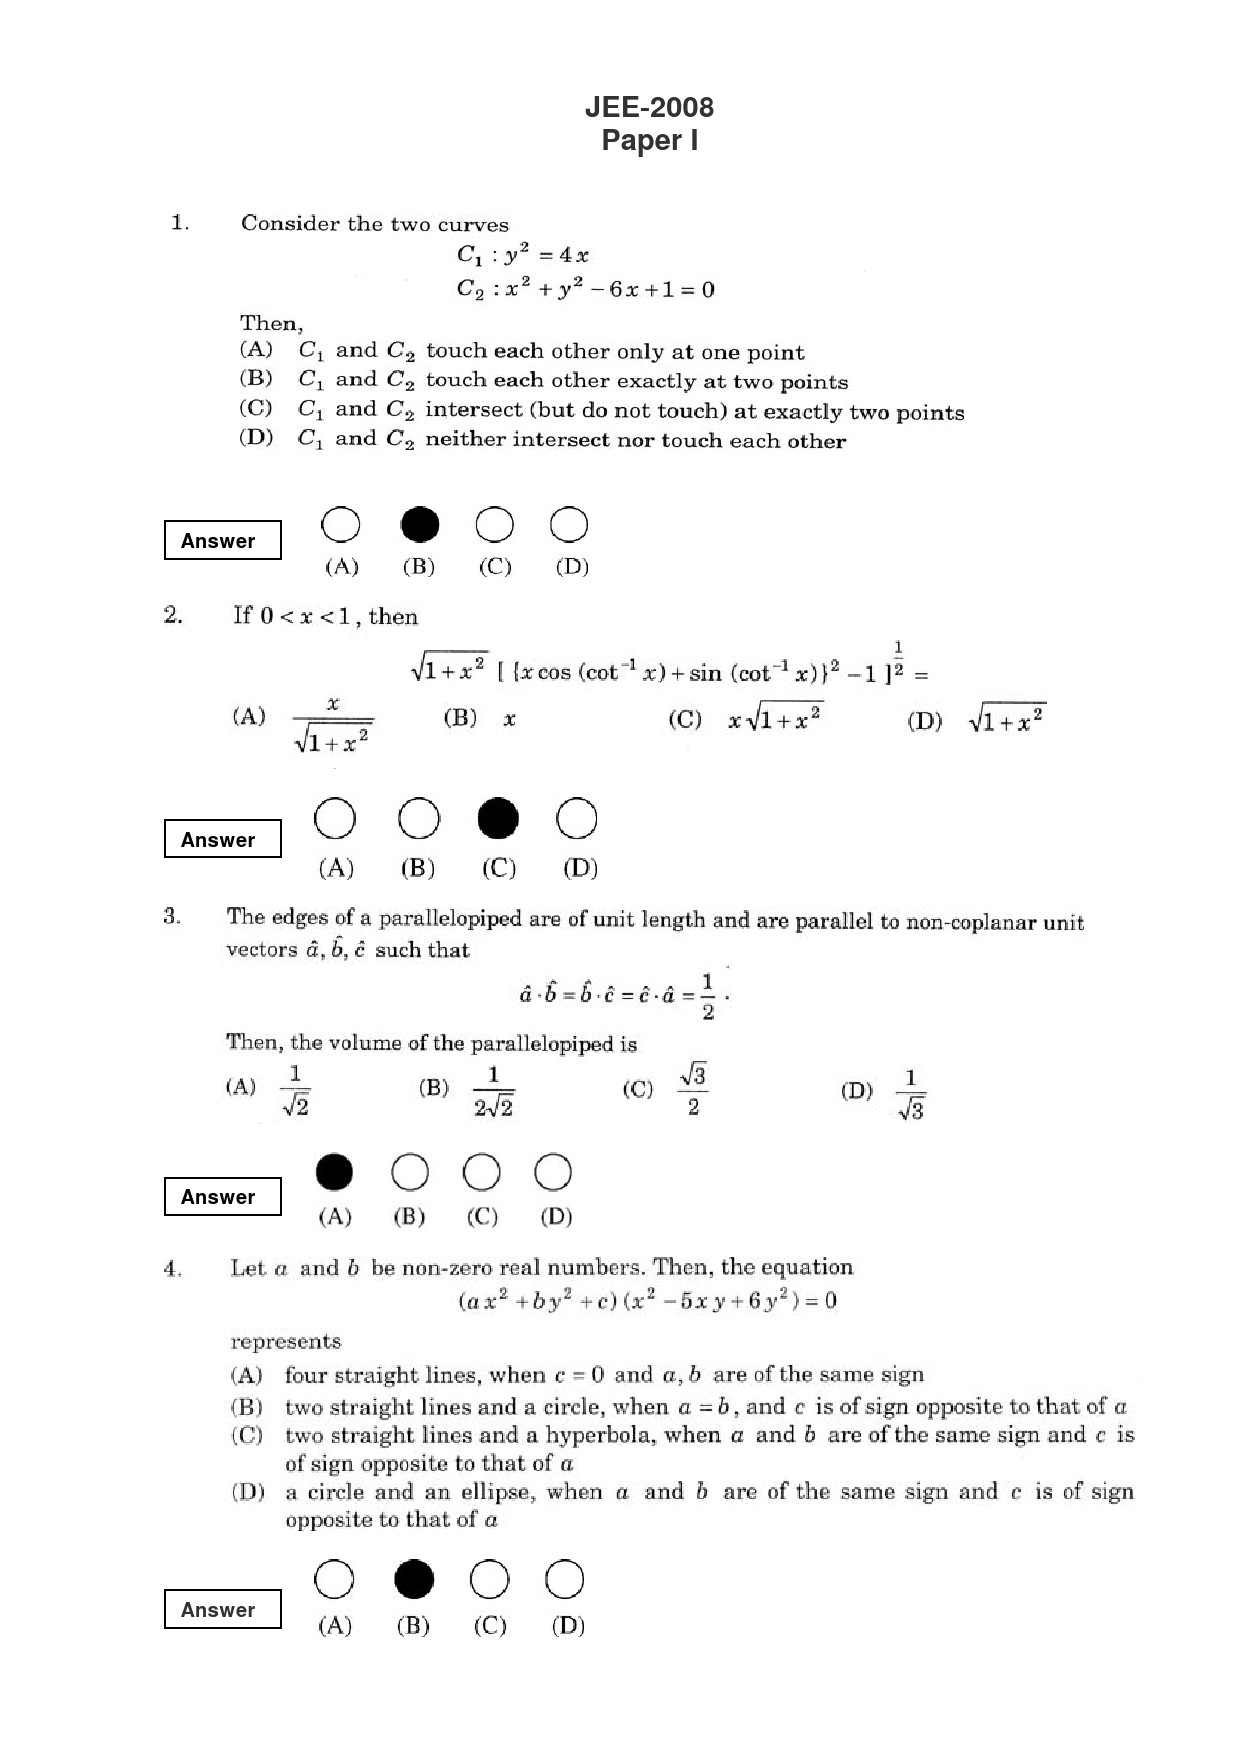 JEE Exam Question Paper 2008 Paper 1 1